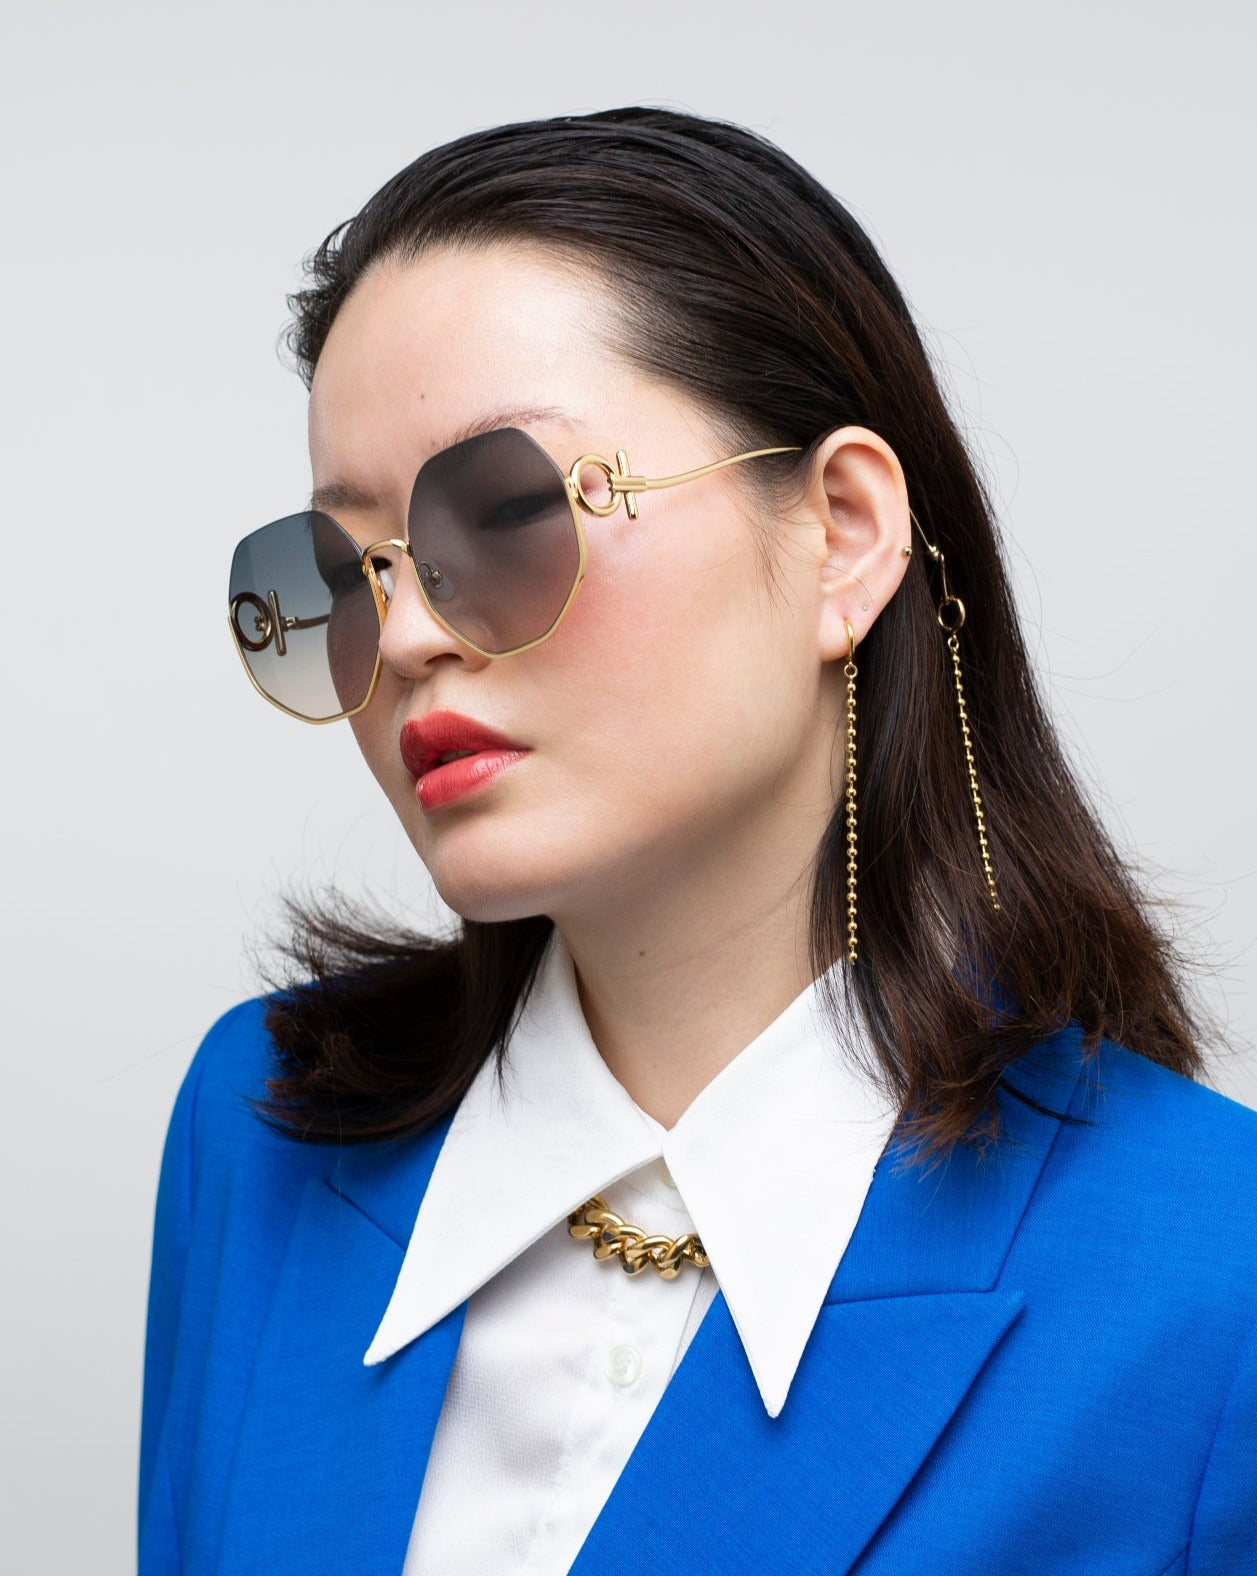 A person with straight, dark hair is wearing large, UVA &amp; UVB-protected For Art&#39;s Sake® Palace gold-rimmed sunglasses with gradient lenses. They are dressed in a blue blazer over a white collared shirt and accessorized with 18-karat gold-plated chain earrings and necklace. The background is a solid light gray.